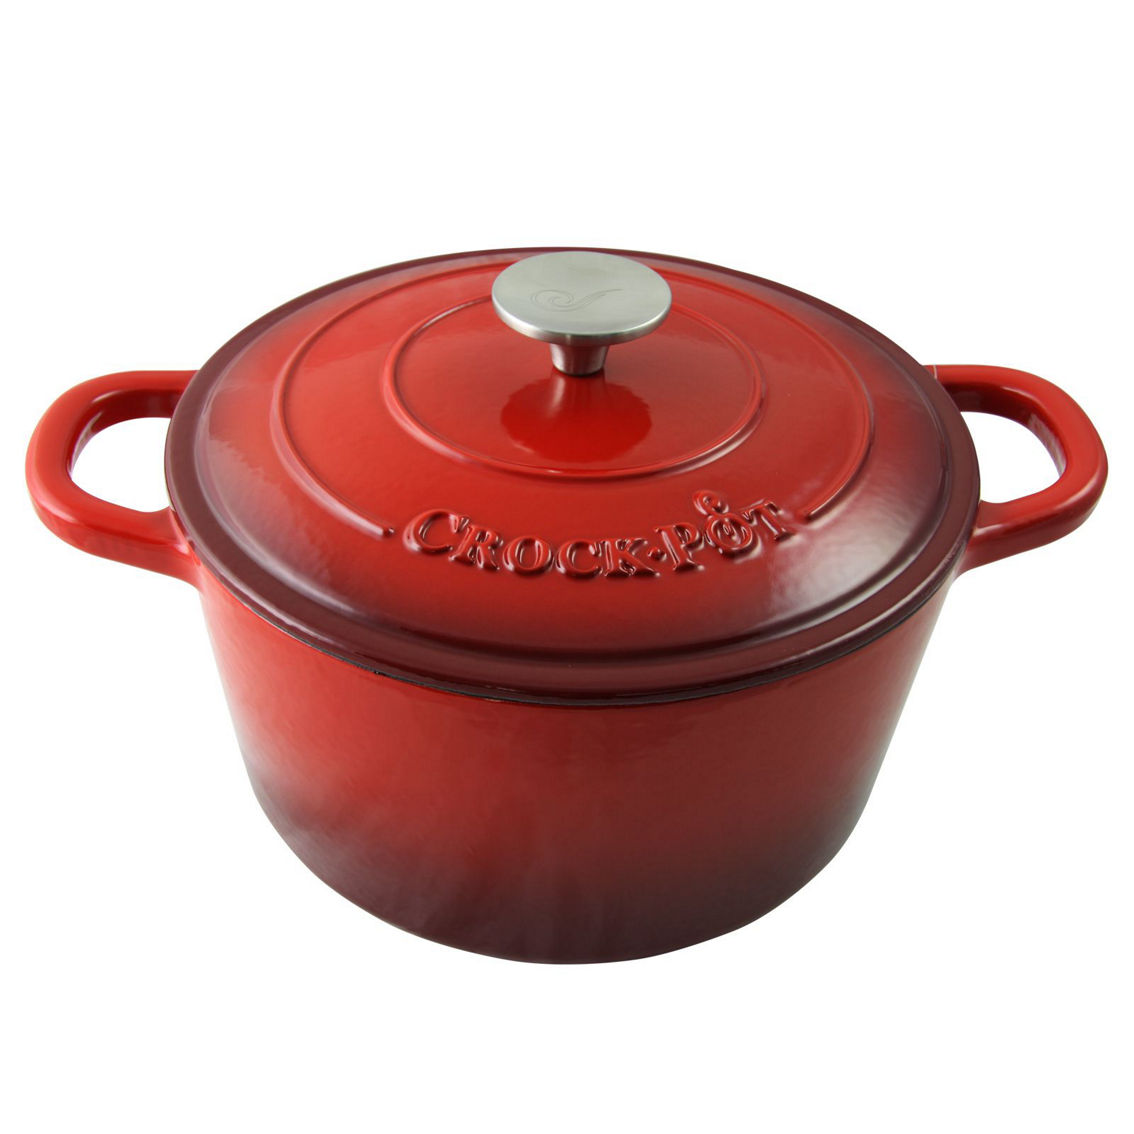 Crock Pot Artisan 5 Quart Round Enameled Cast Iron Dutch Oven In Scarlet  Red, Cookware, Household